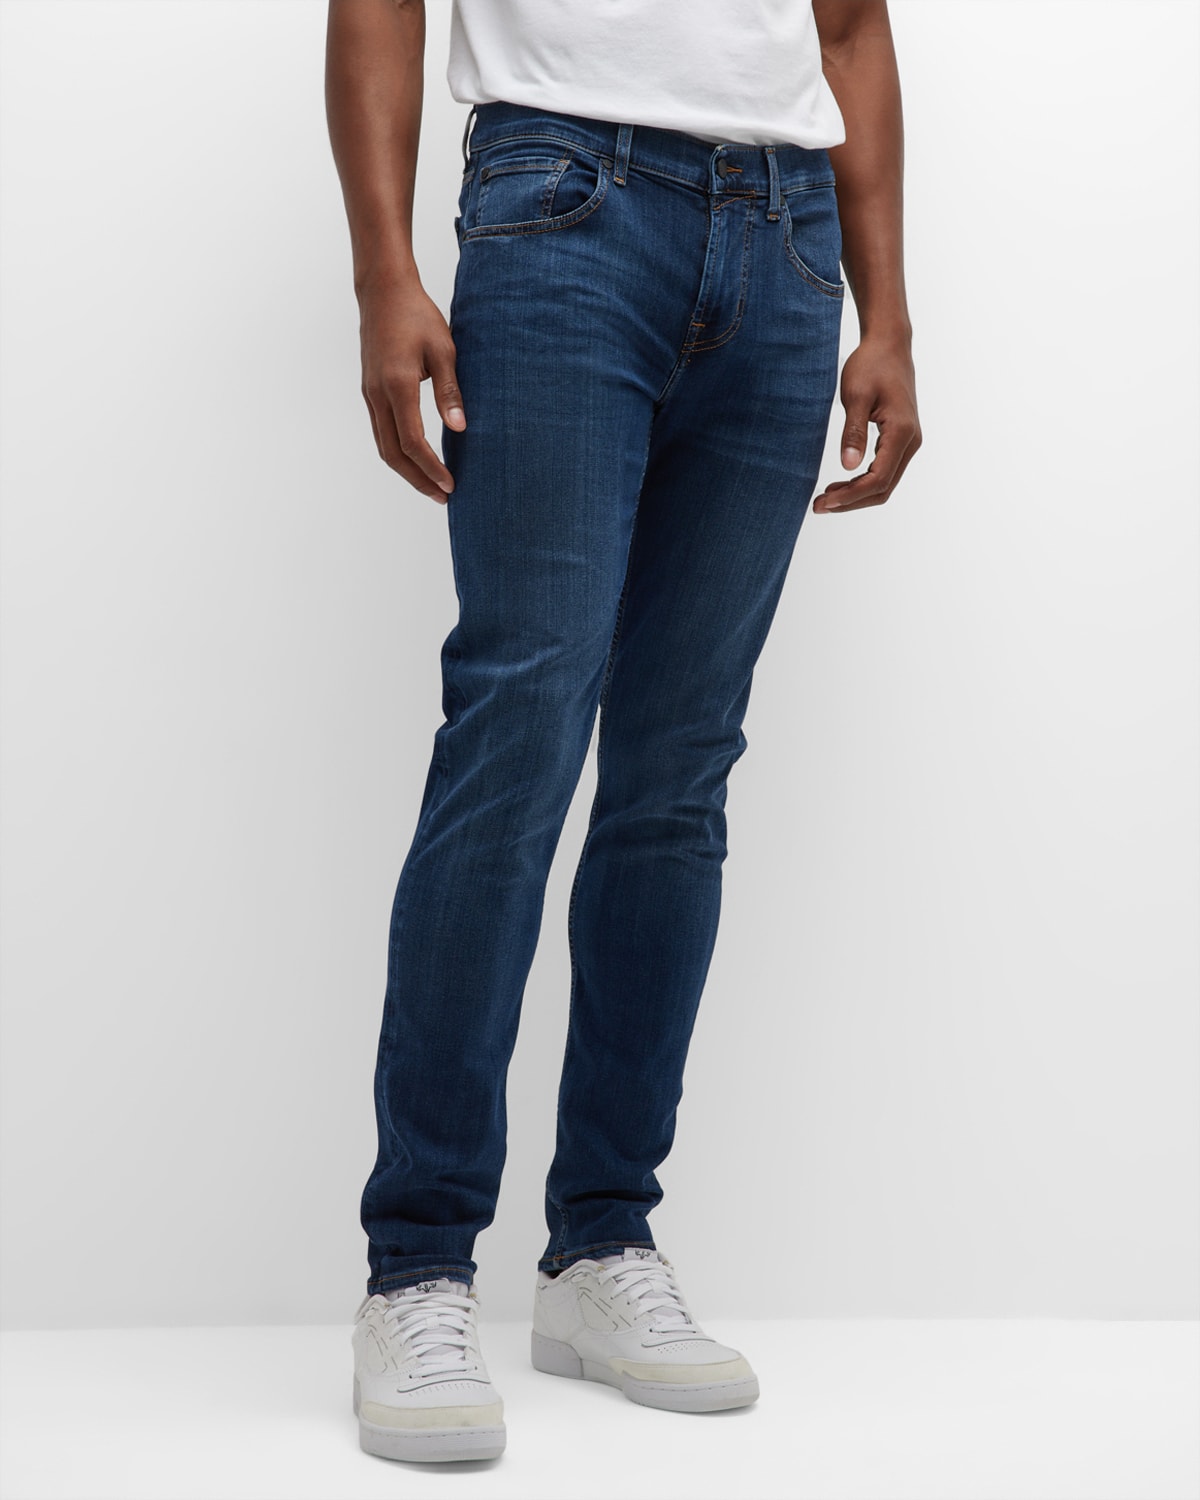 7 for all mankind Men's Luxe Performance Straight-Leg Jeans | Neiman Marcus